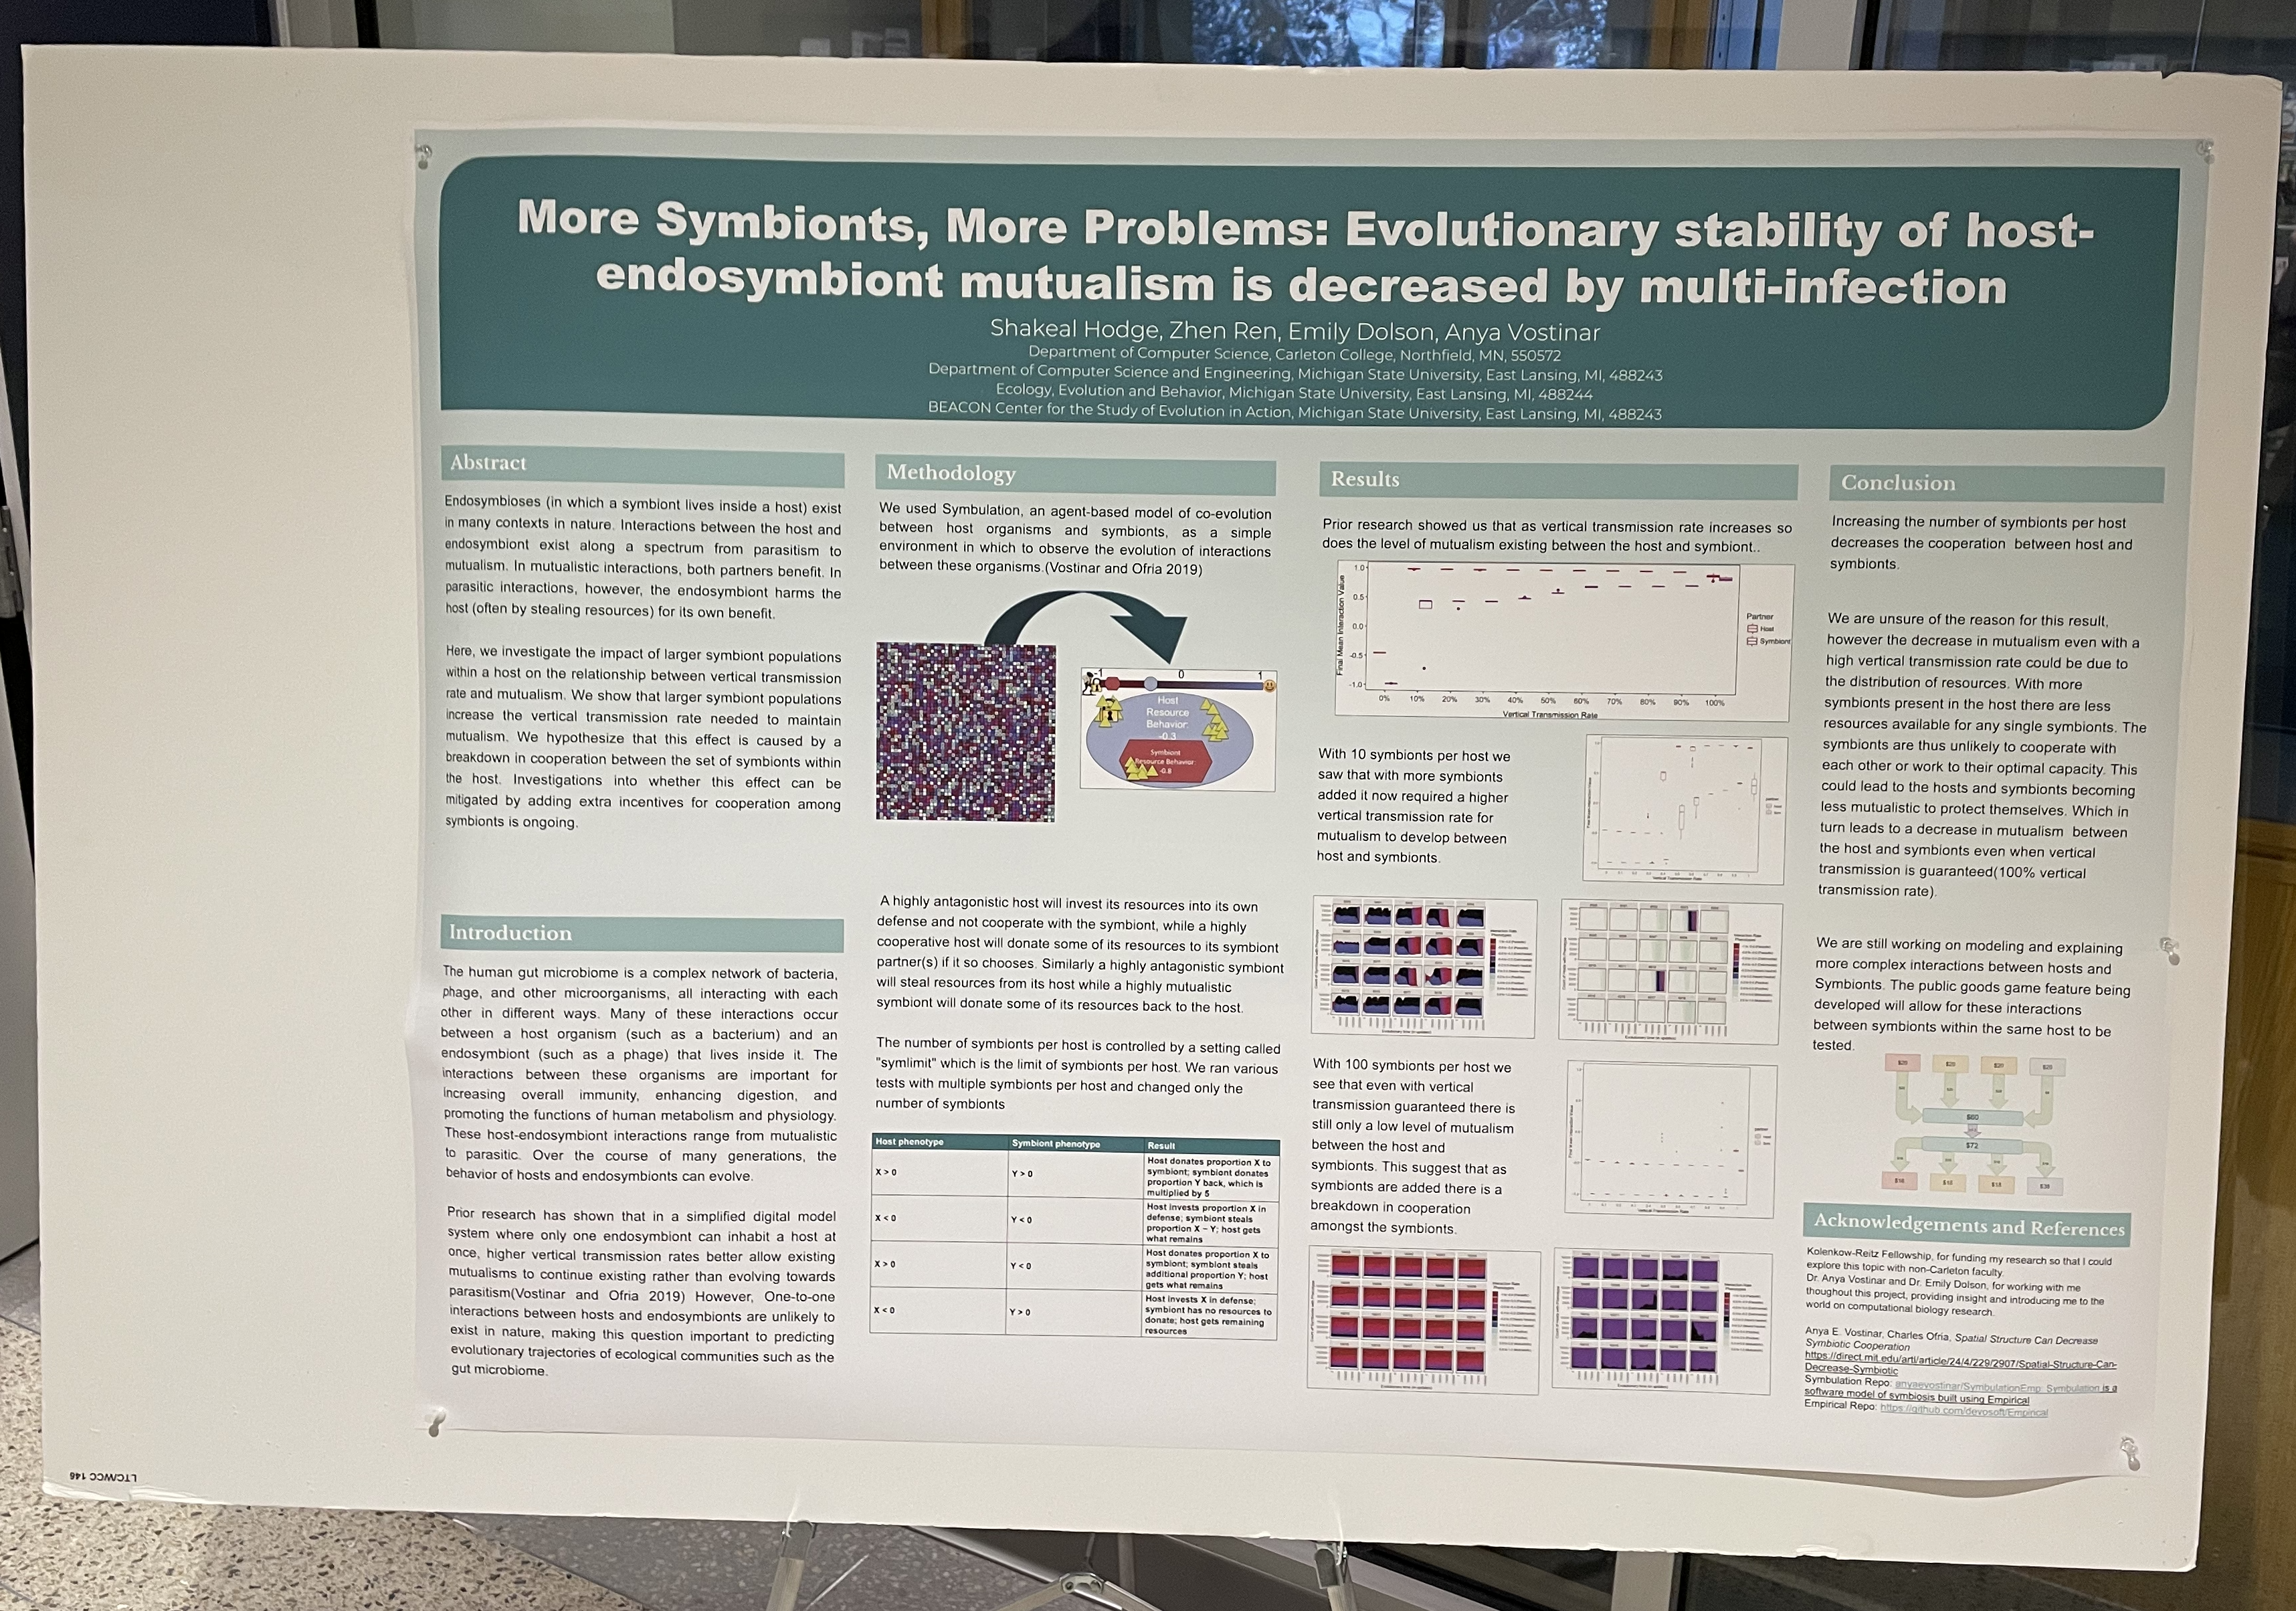 A picture of a research poster.